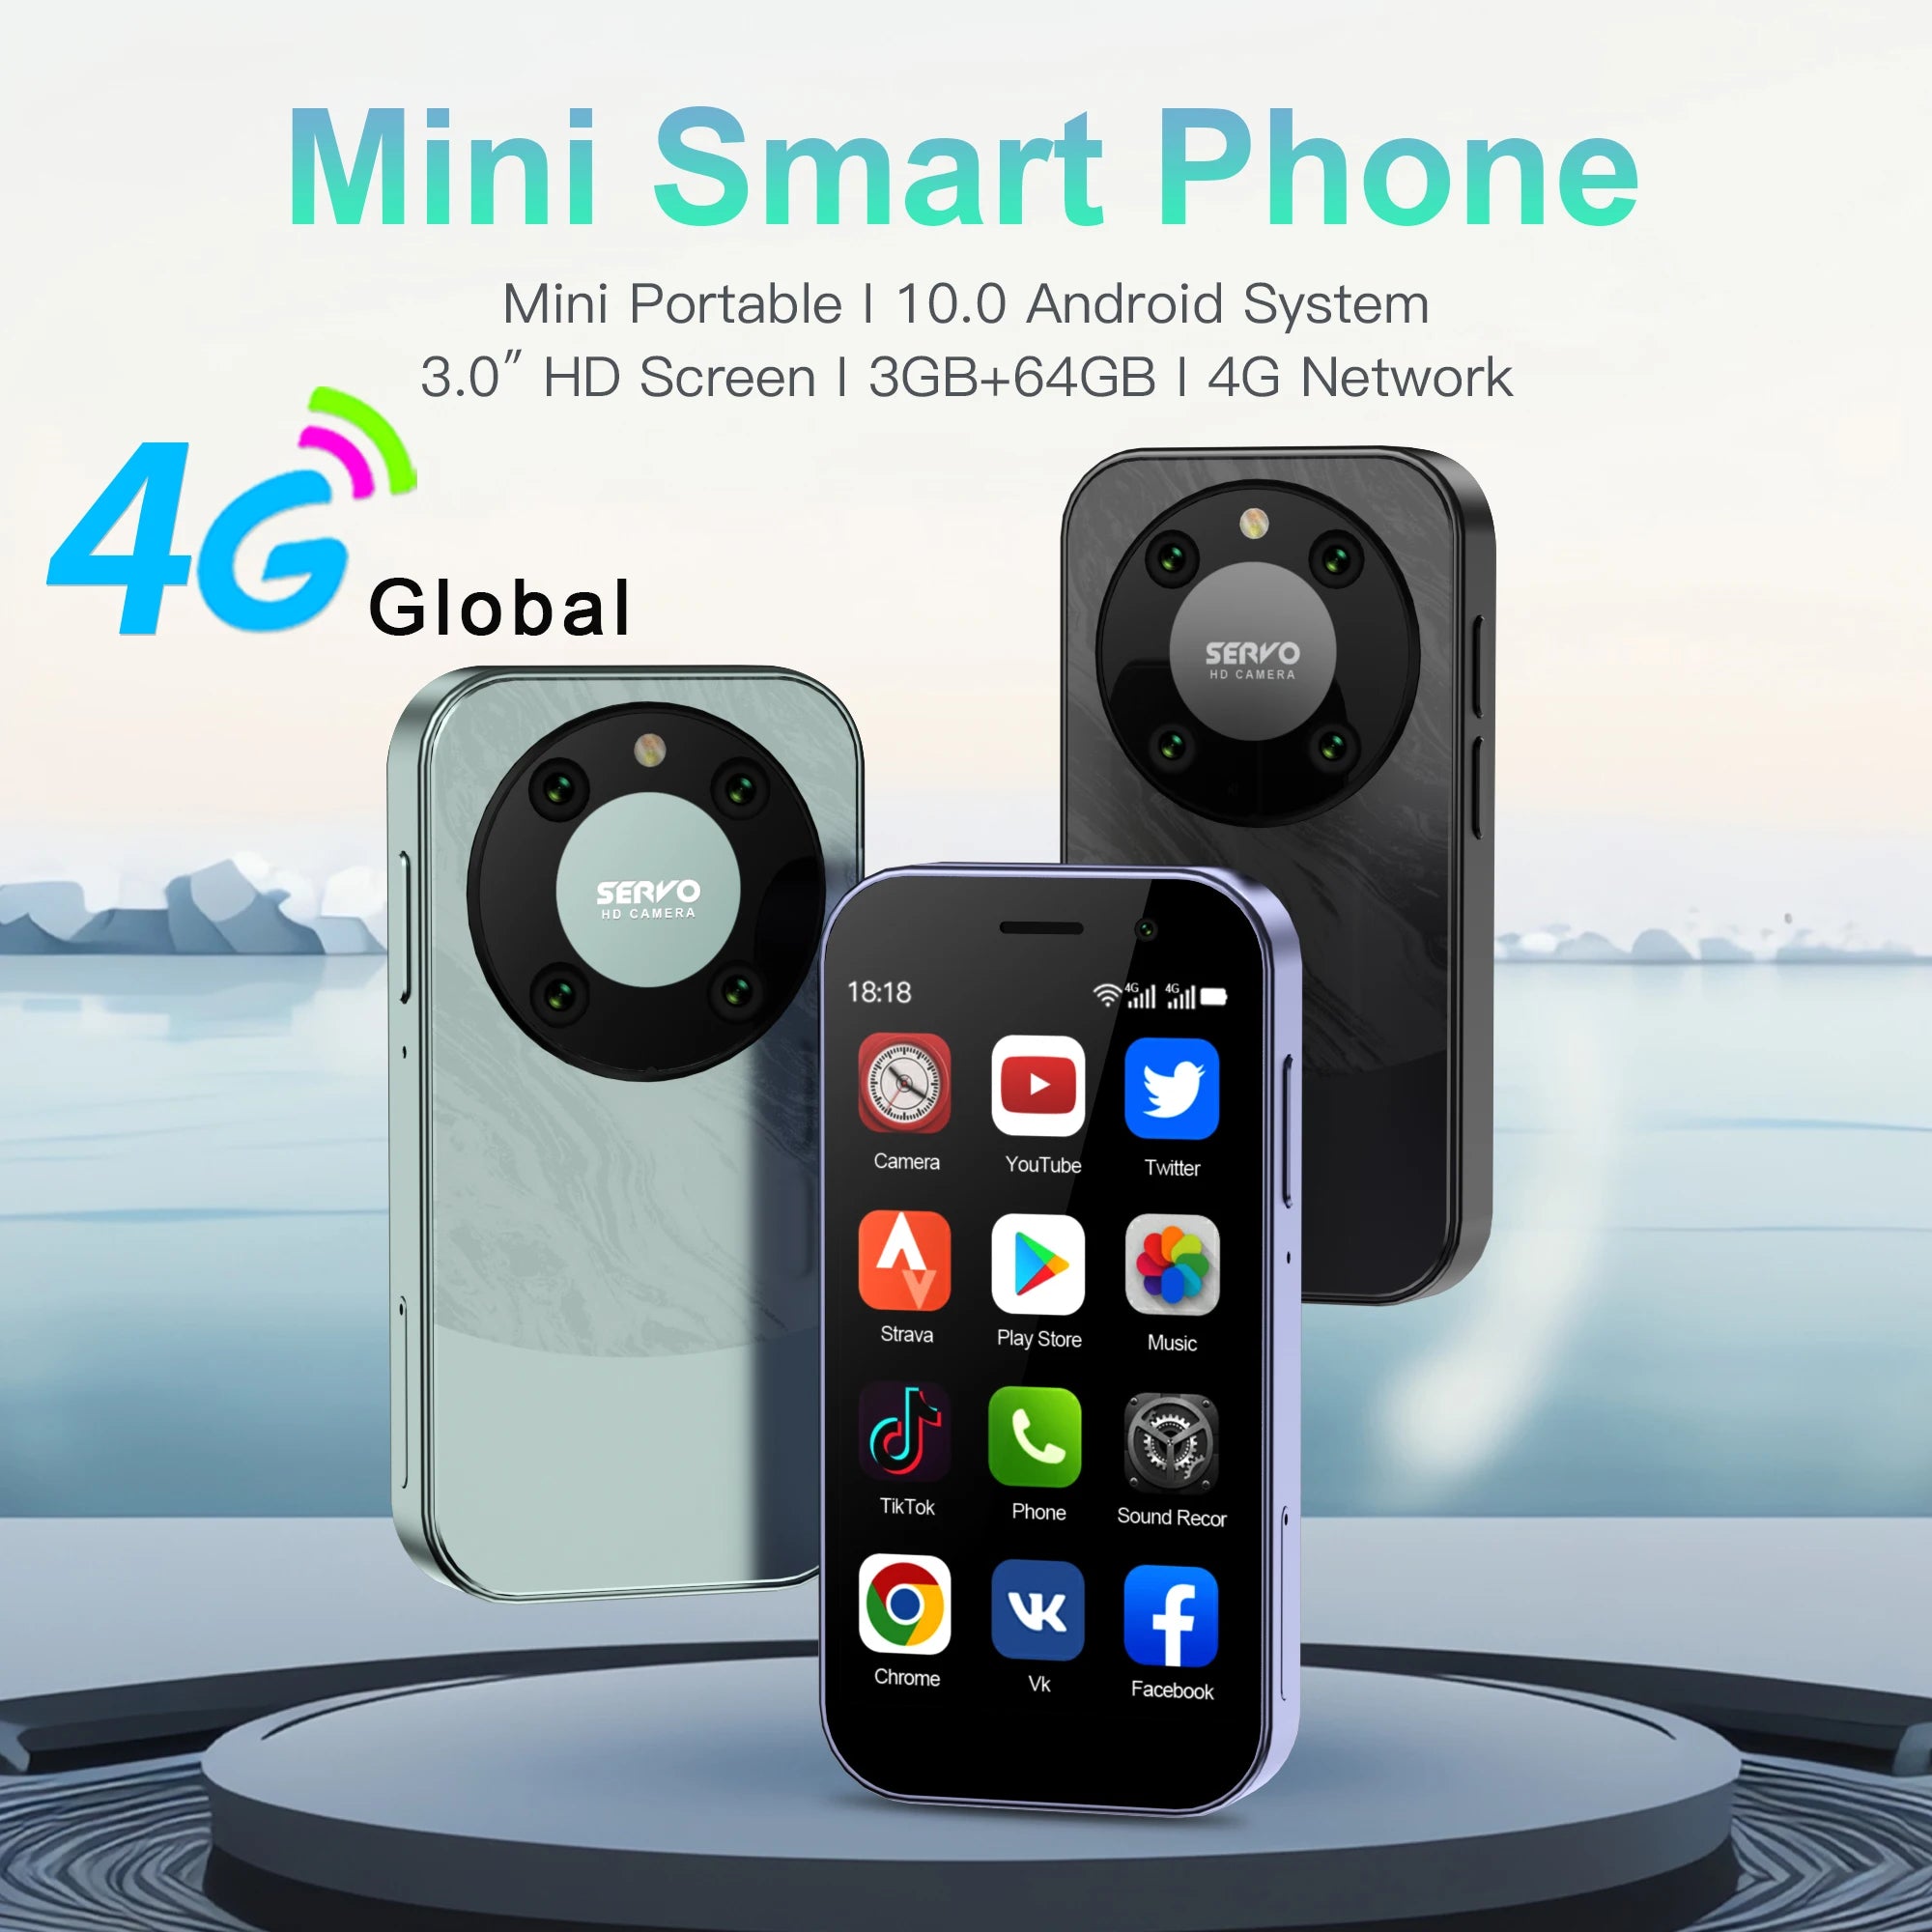 SERVO KING9000 4G LTE Cellular Mini Smartphone 16G/64G Android 10.0 2000mAh 3.0'' Display Small Mobile Phone